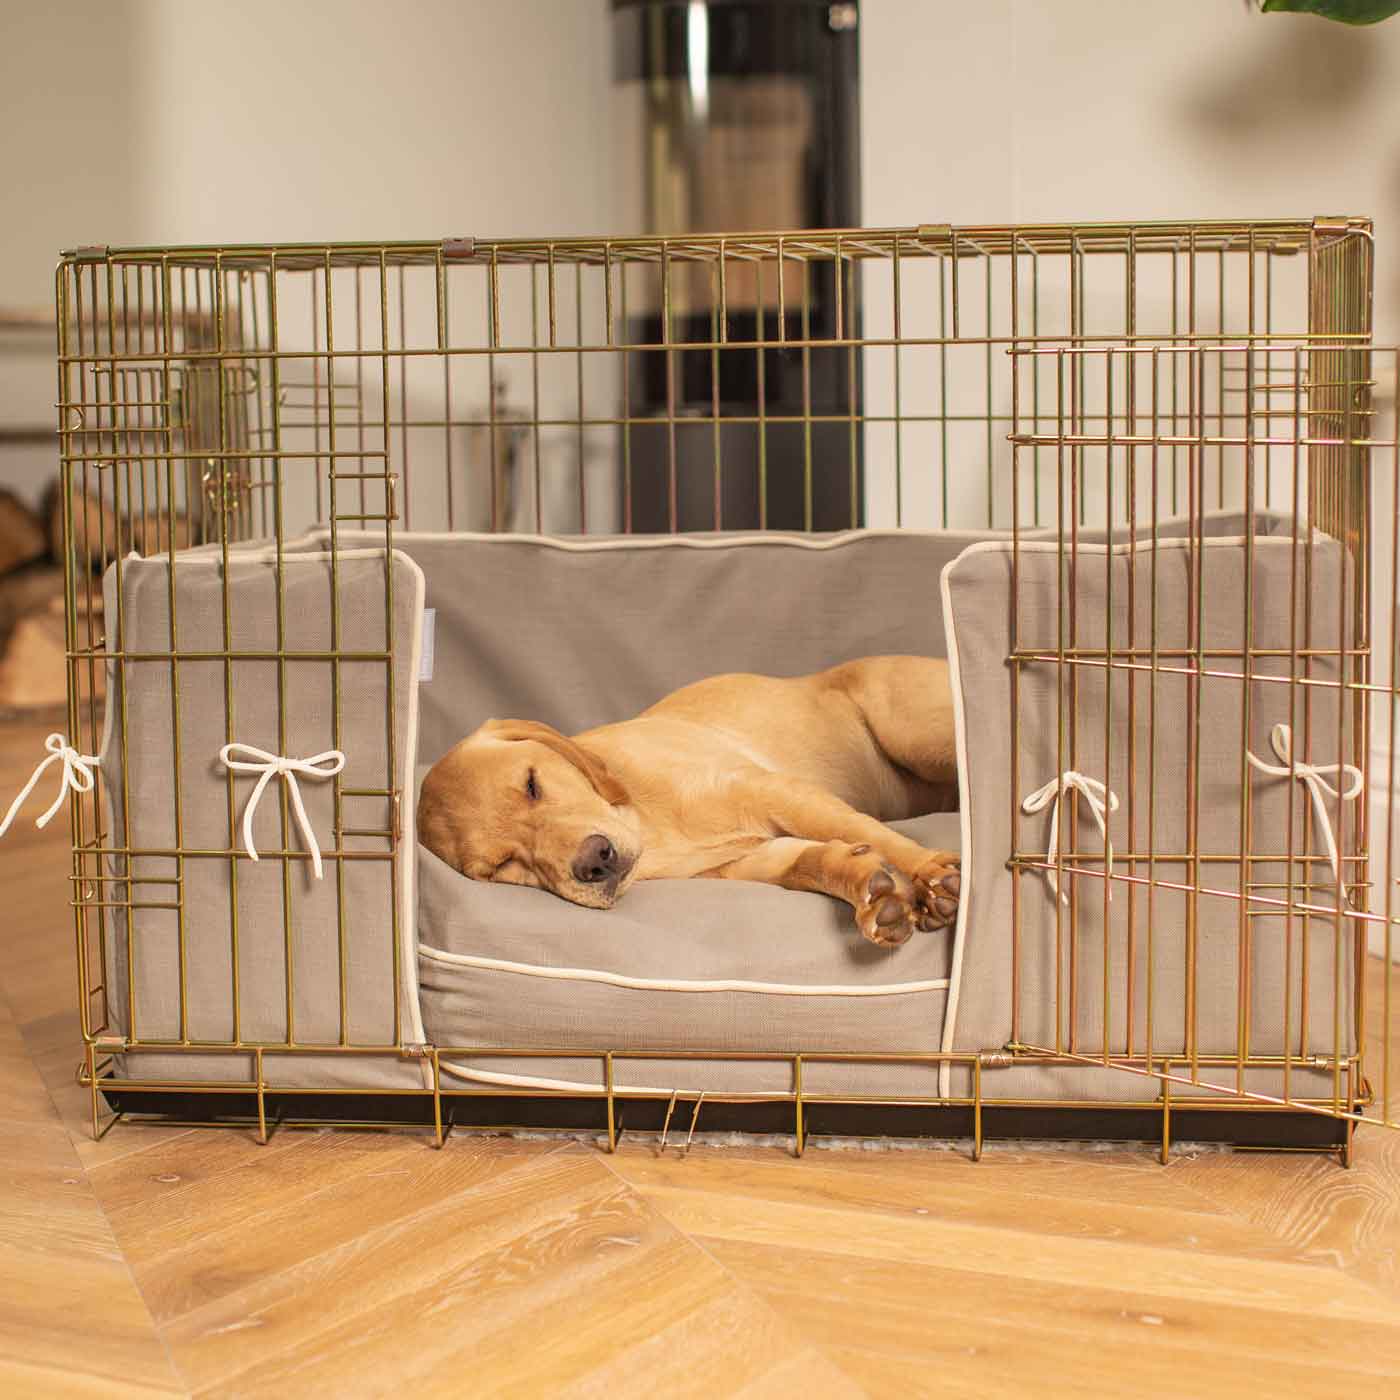 Discover Our Heavy-Duty Gold Dog Cage With Savanna Stone Cushion & Bumper! The Perfect Cage Accessorize. Available To Personalize Here at Lords & Labradors US